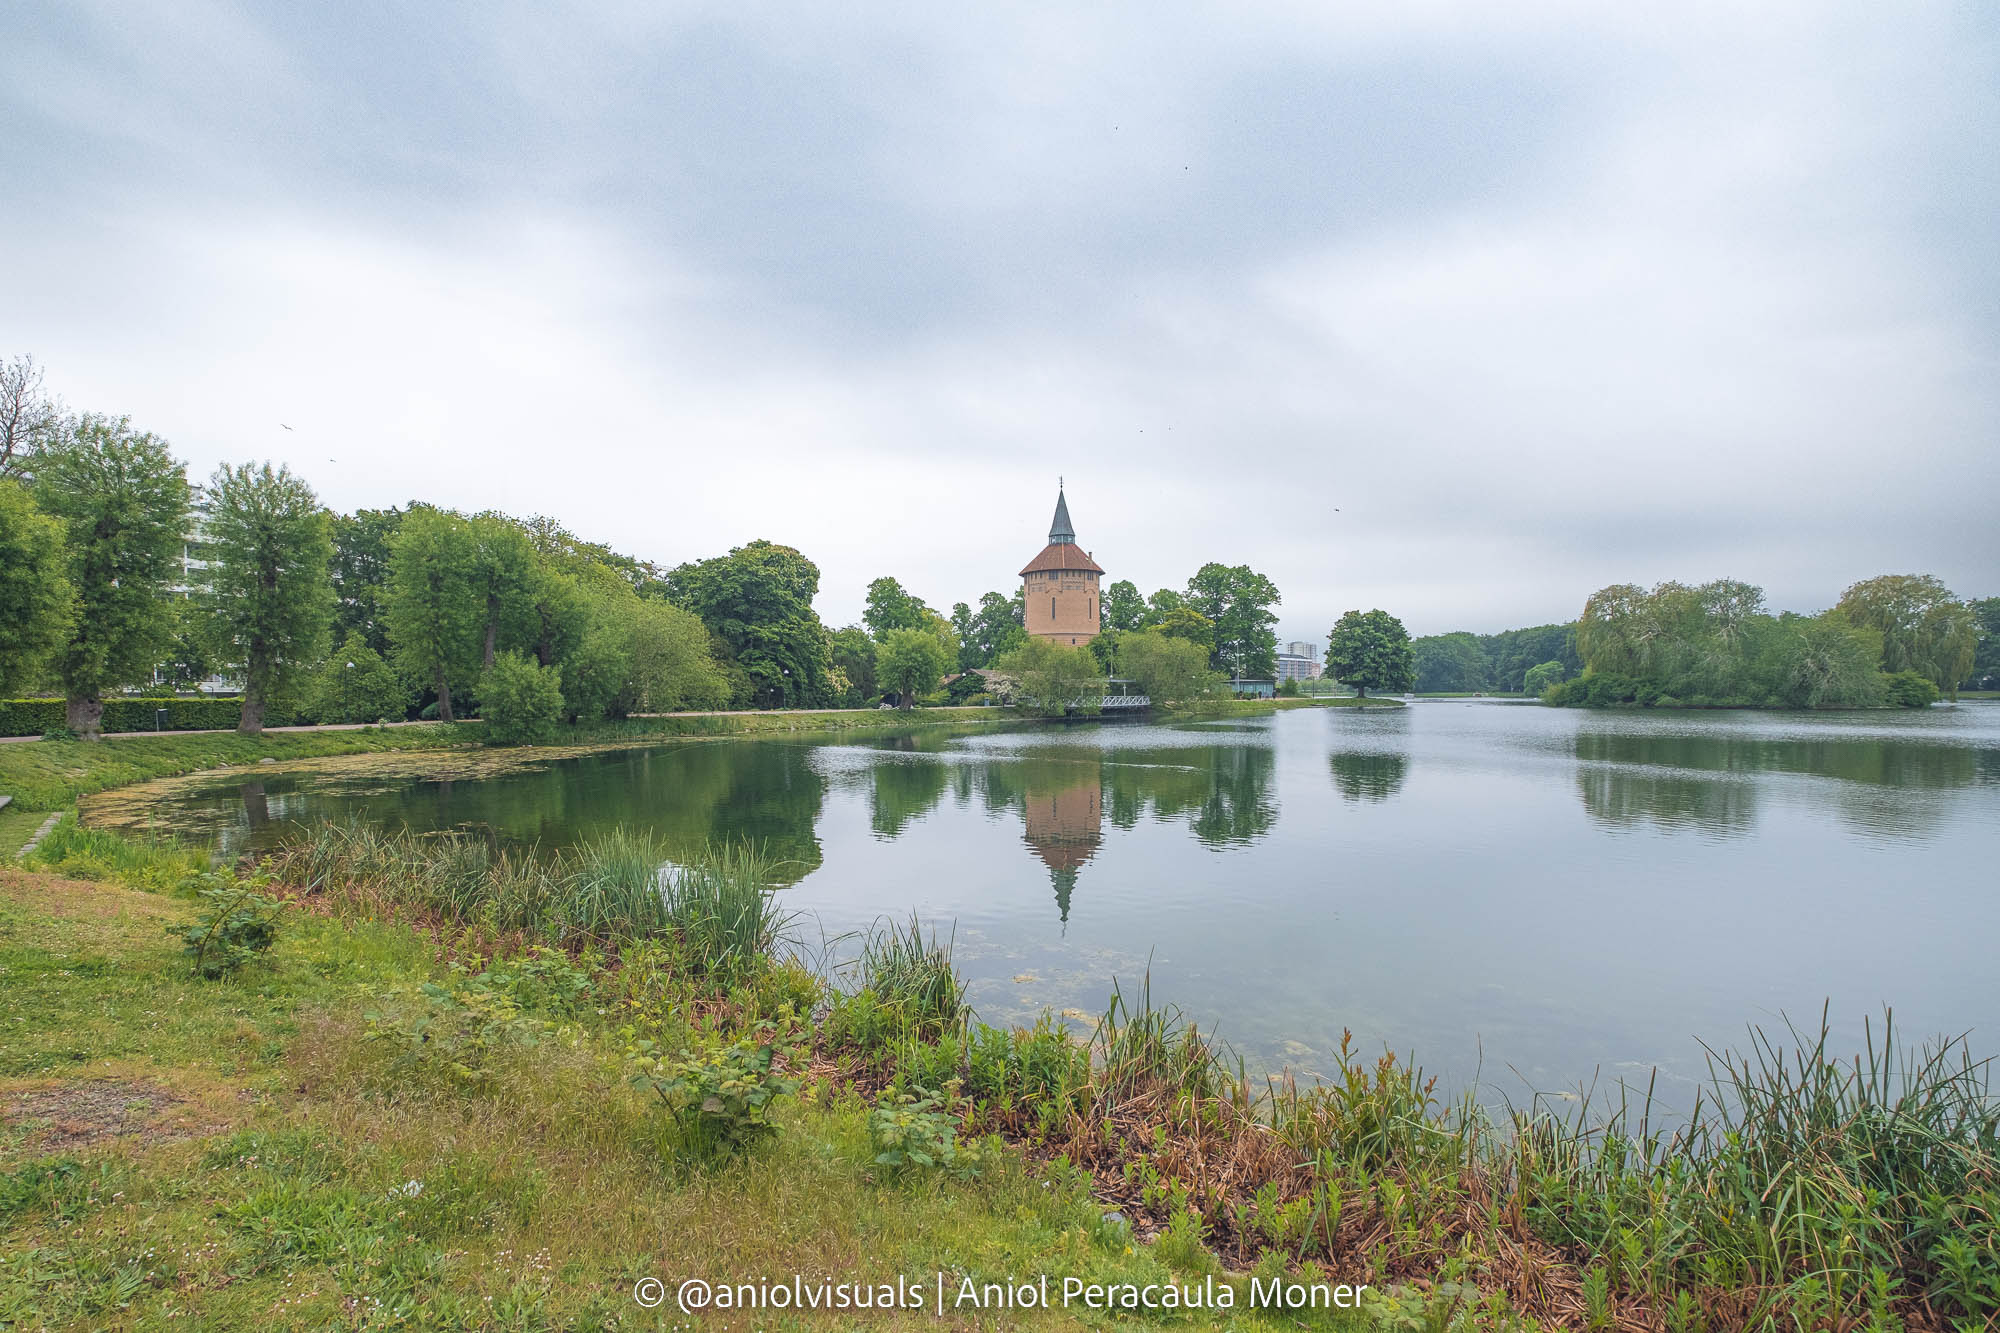 A cloudy day in a green park in Malmö with a big lake and an old tower construction reflected in it